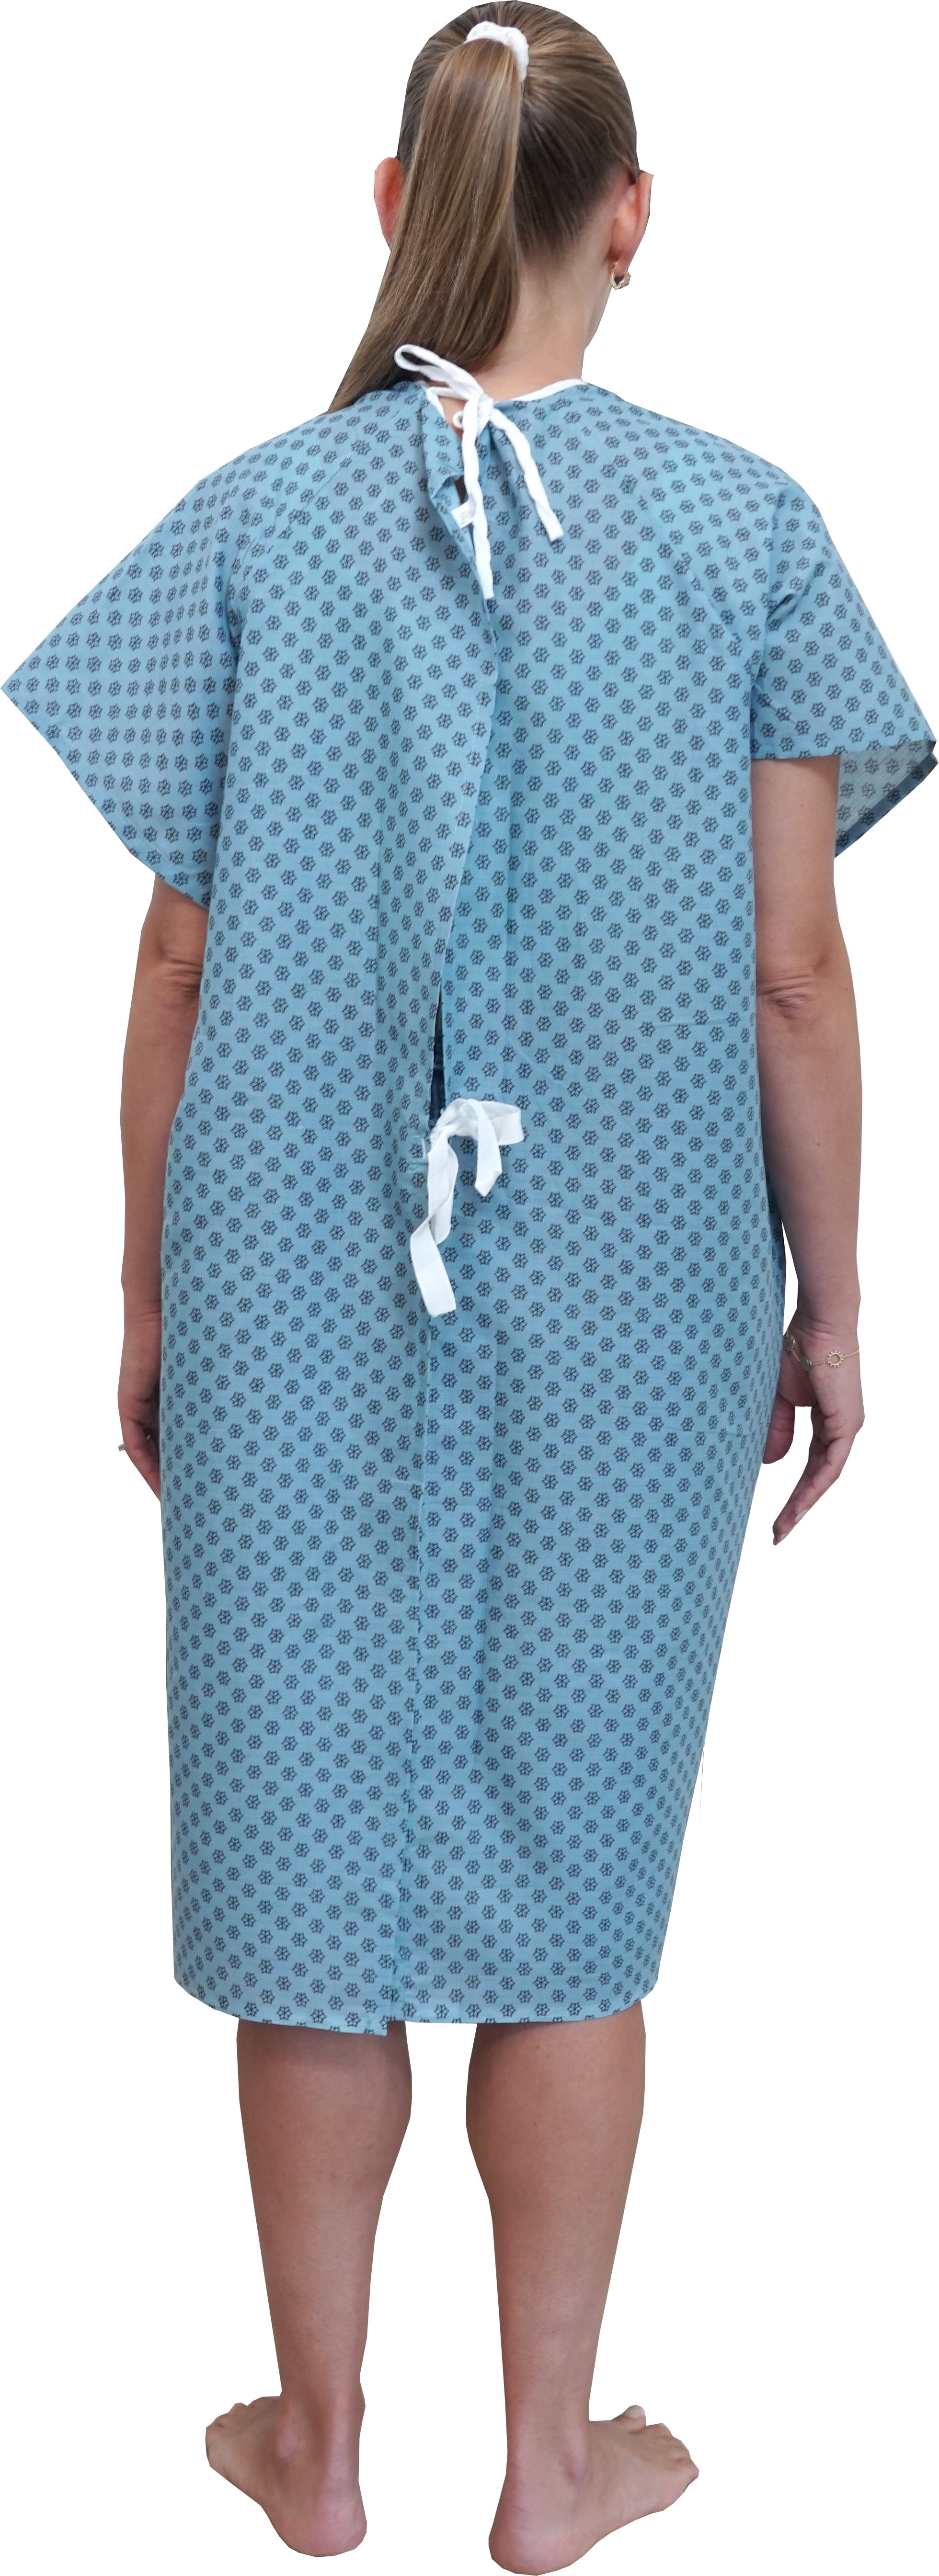 Silvert's Open Back Night Gown For Ladies - Assisted Dressing Hospital Gown  - Floral Chain Medium - Walmart.com